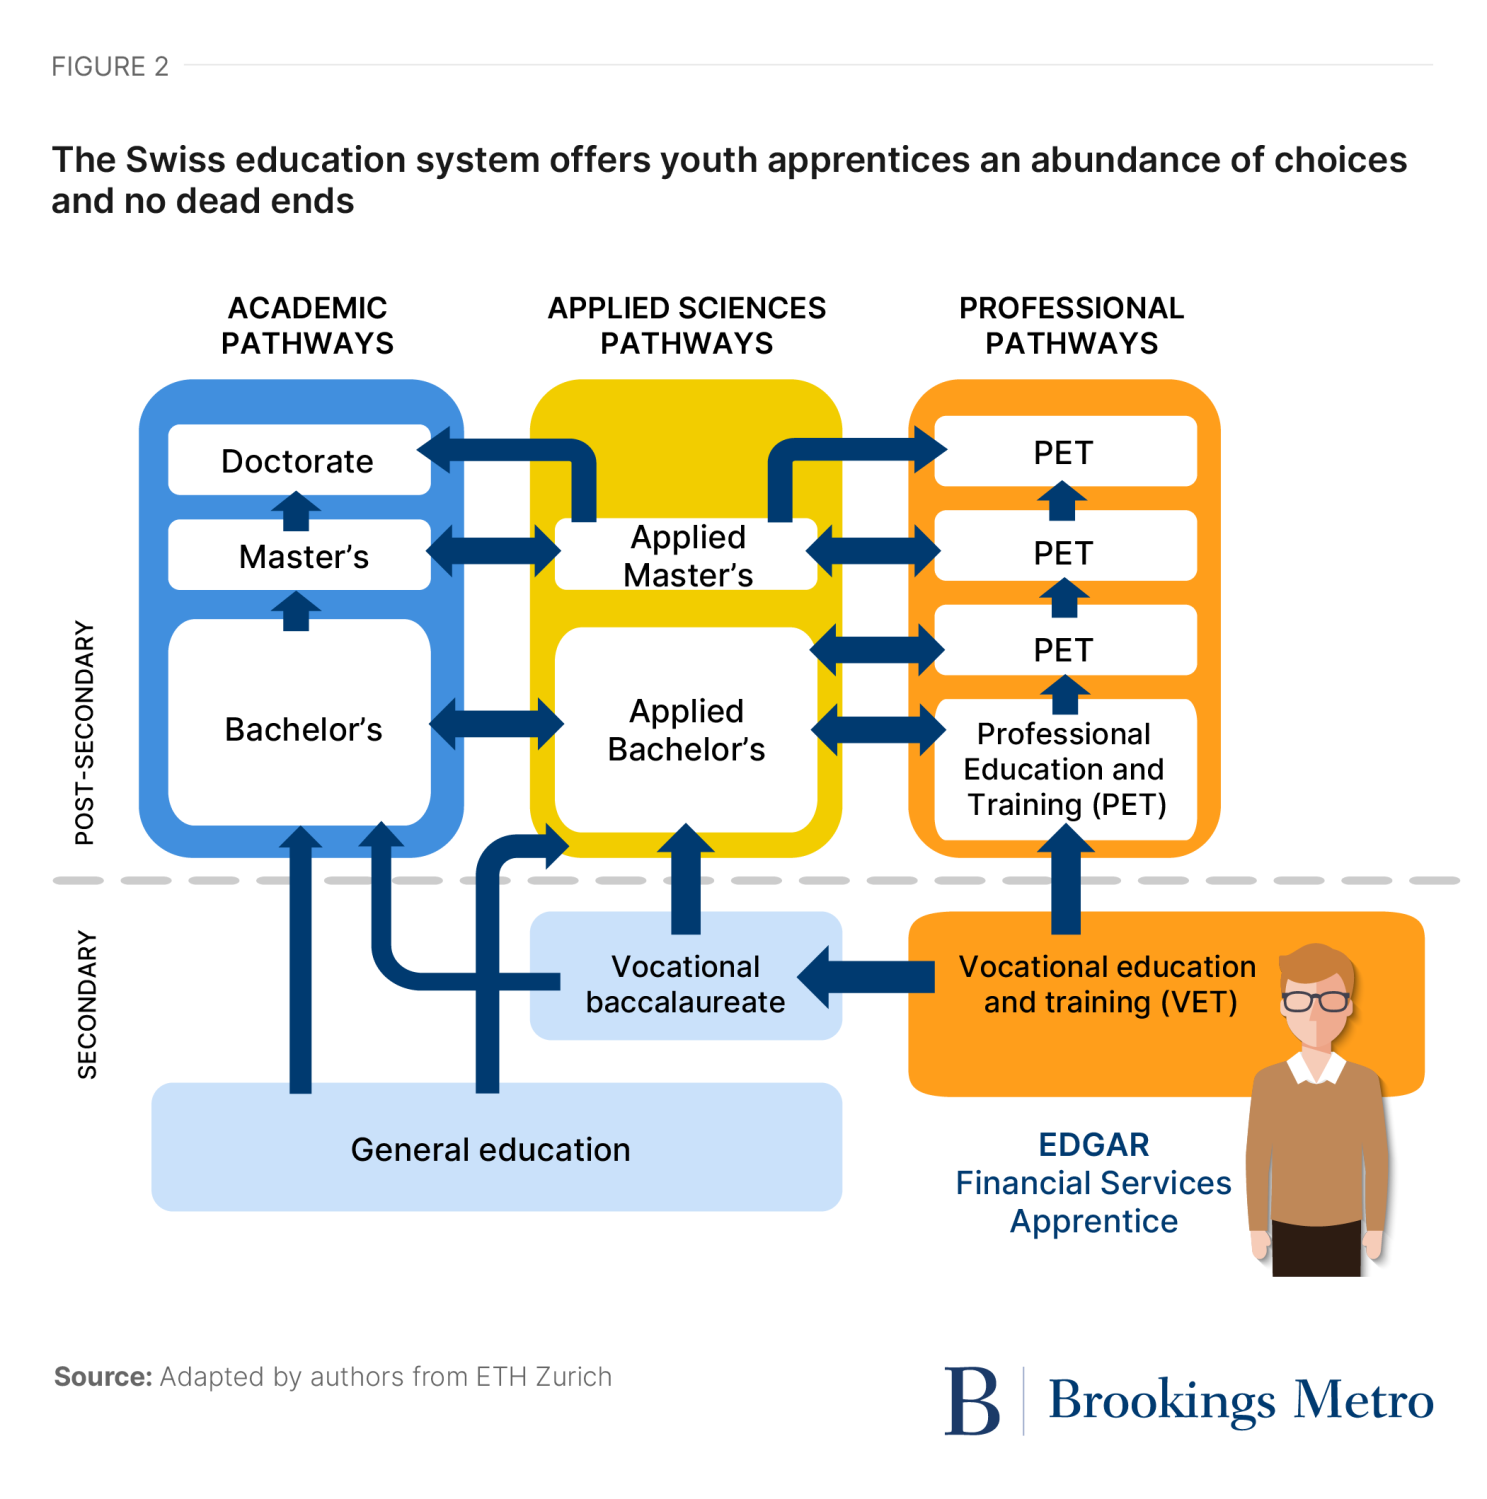 Figure 2. The Swiss education system offers youth apprentices an abundance of choices and no dead ends.